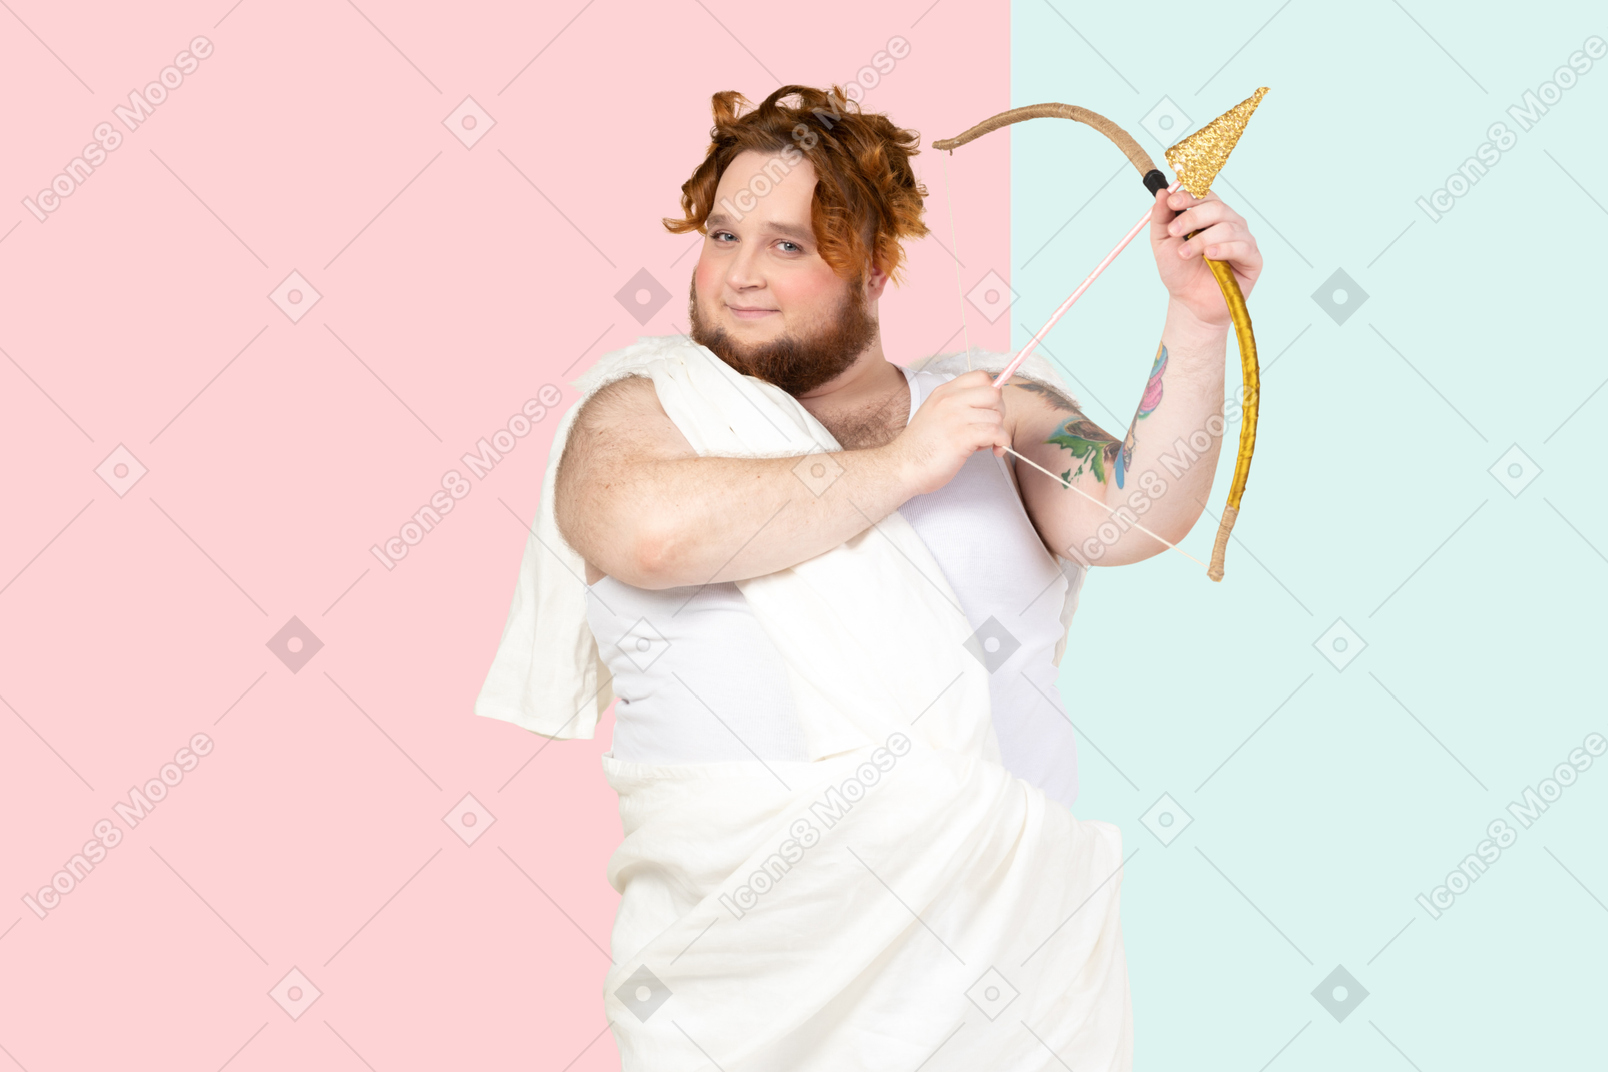 Cupid with bow and arrow against a pink and blue background